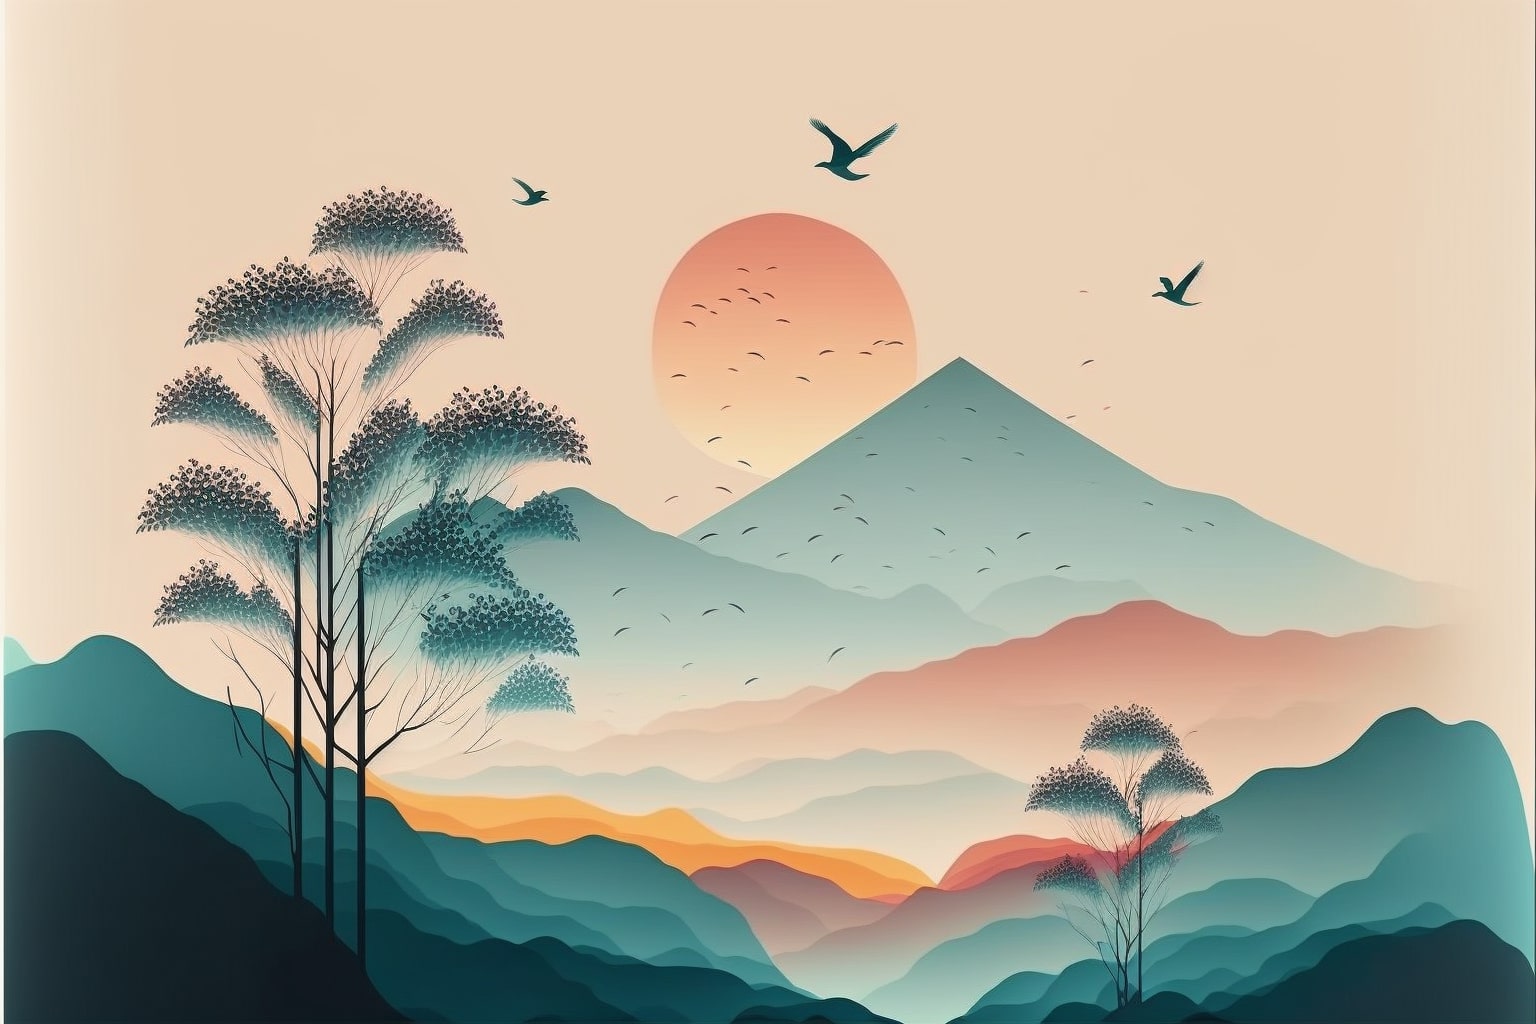 Painting of a mountain with birds flying over it by Petros Afshar.